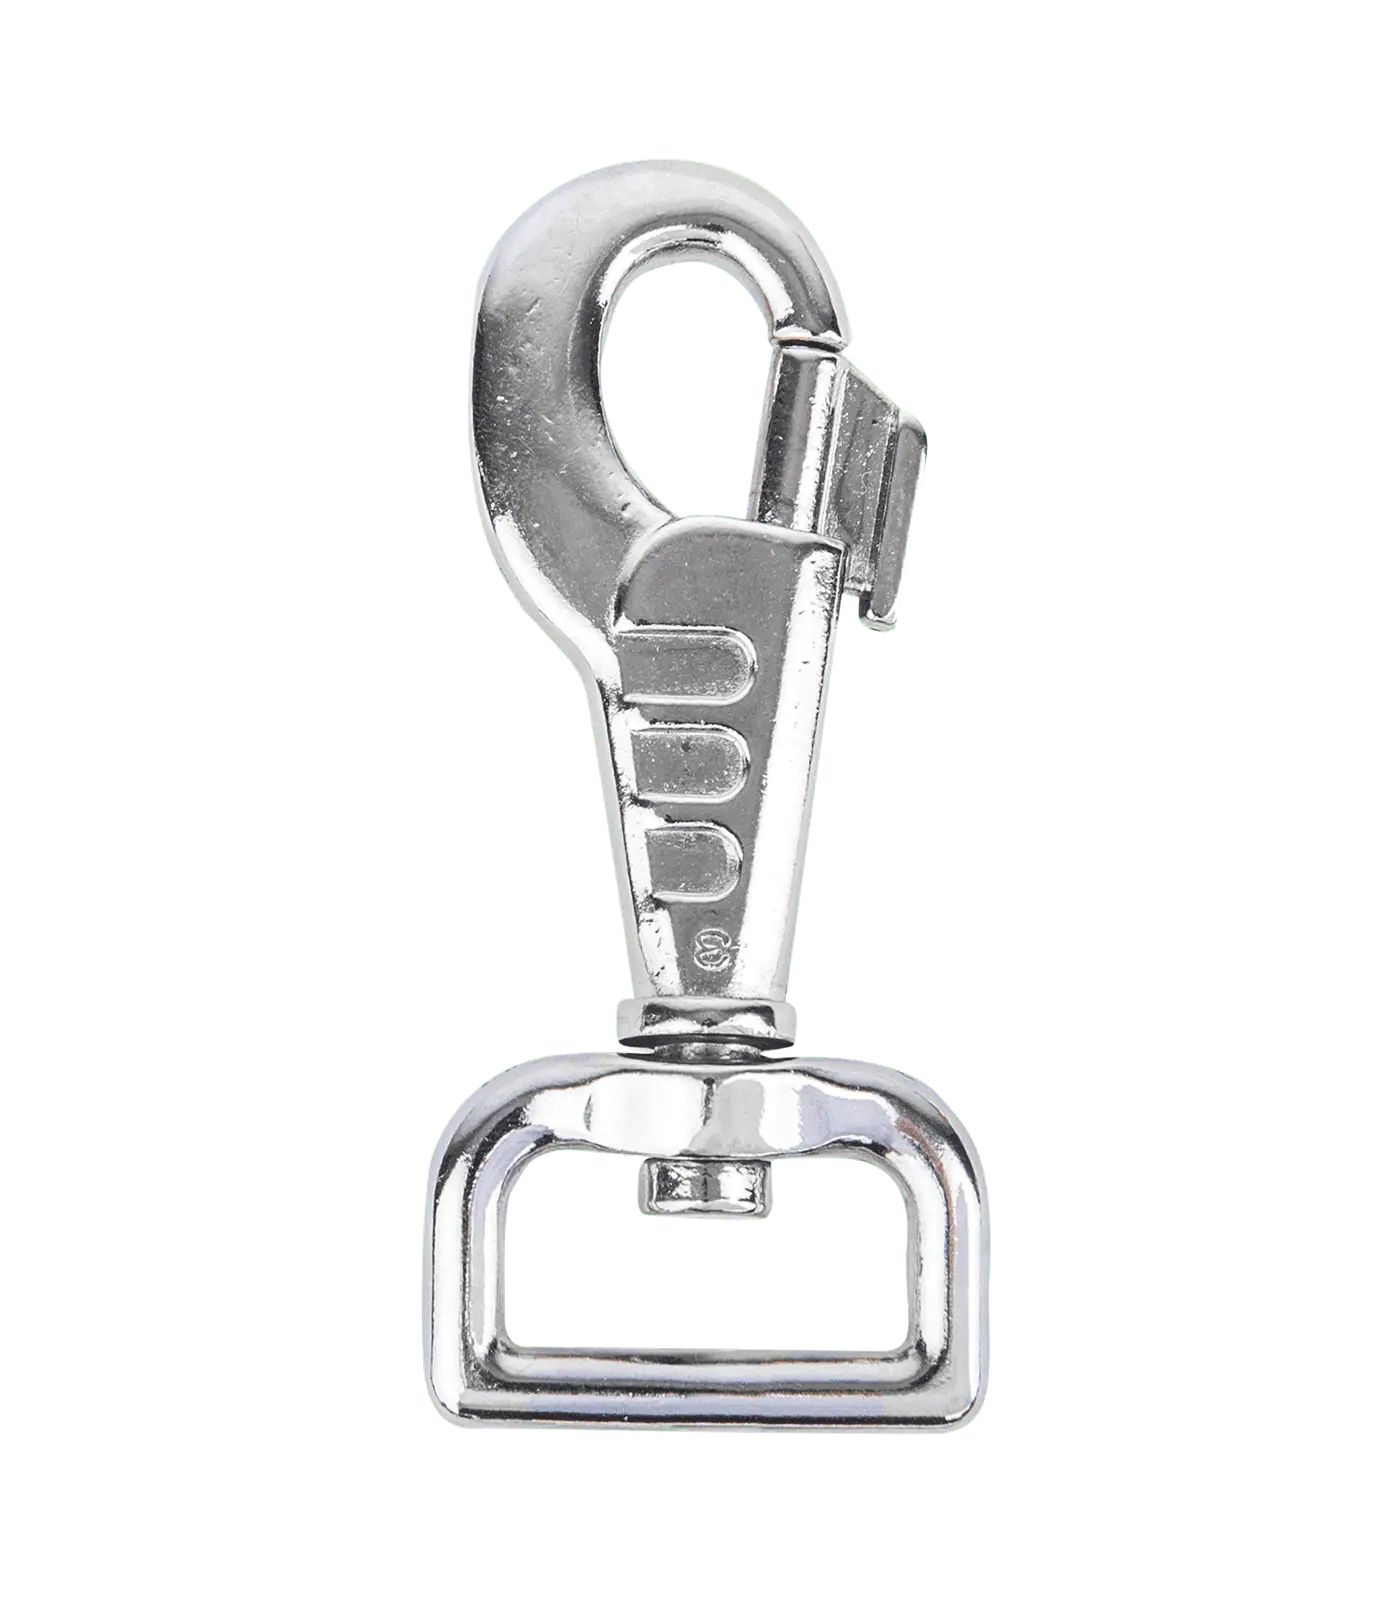 Snap hook with D-ring